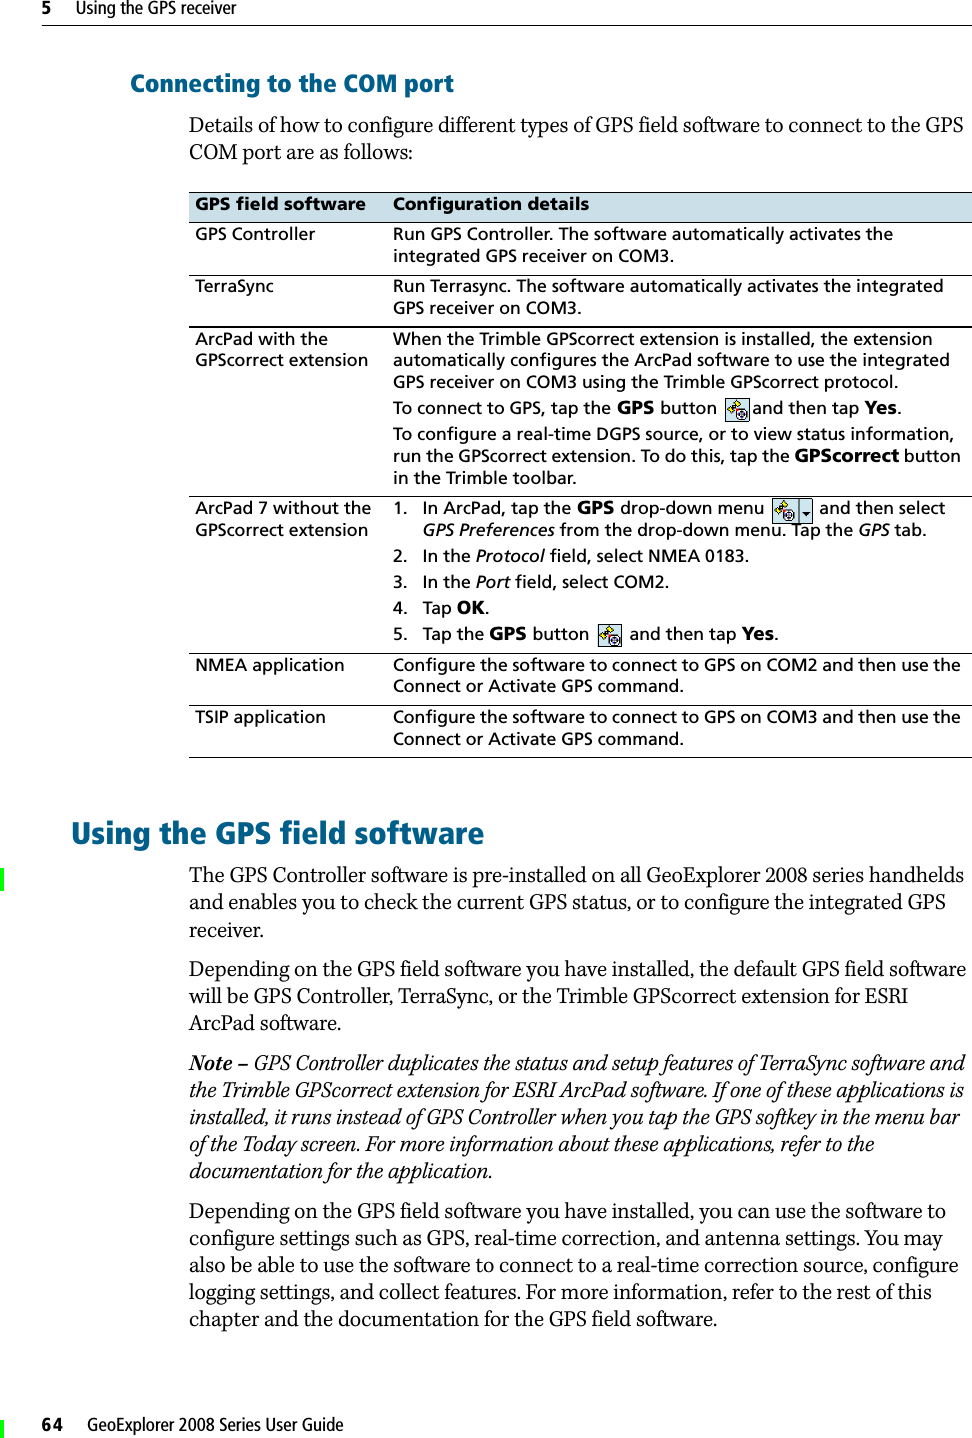 5     Using the GPS receiver64     GeoExplorer 2008 Series User GuideConnecting to the COM portDetails of how to configure different types of GPS field software to connect to the GPS COM port are as follows: Using the GPS field softwareThe GPS Controller software is pre-installed on all GeoExplorer 2008 series handhelds and enables you to check the current GPS status, or to configure the integrated GPS receiver. Depending on the GPS field software you have installed, the default GPS field software will be GPS Controller, TerraSync, or the Trimble GPScorrect extension for ESRI ArcPad software. Note – GPS Controller duplicates the status and setup features of TerraSync software and the Trimble GPScorrect extension for ESRI ArcPad software. If one of these applications is installed, it runs instead of GPS Controller when you tap the GPS softkey in the menu bar of the Today screen. For more information about these applications, refer to the documentation for the application.Depending on the GPS field software you have installed, you can use the software to configure settings such as GPS, real-time correction, and antenna settings. You may also be able to use the software to connect to a real-time correction source, configure logging settings, and collect features. For more information, refer to the rest of this chapter and the documentation for the GPS field software.GPS field software Configuration detailsGPS Controller Run GPS Controller. The software automatically activates the integrated GPS receiver on COM3. TerraSync Run Terrasync. The software automatically activates the integrated GPS receiver on COM3.ArcPad with the GPScorrect extensionWhen the Trimble GPScorrect extension is installed, the extension automatically configures the ArcPad software to use the integrated GPS receiver on COM3 using the Trimble GPScorrect protocol. To connect to GPS, tap the GPS button and then tap Yes.To configure a real-time DGPS source, or to view status information, run the GPScorrect extension. To do this, tap the GPScorrect button in the Trimble toolbar.ArcPad 7 without the GPScorrect extension1. In ArcPad, tap the GPS drop-down menu   and then select GPS Preferences from the drop-down menu. Tap the GPS tab.2. In the Protocol field, select NMEA 0183.3. In the Port field, select COM2.4. Tap OK.5. Tap the GPS button   and then tap Yes. NMEA application Configure the software to connect to GPS on COM2 and then use the Connect or Activate GPS command.TSIP application Configure the software to connect to GPS on COM3 and then use the Connect or Activate GPS command.